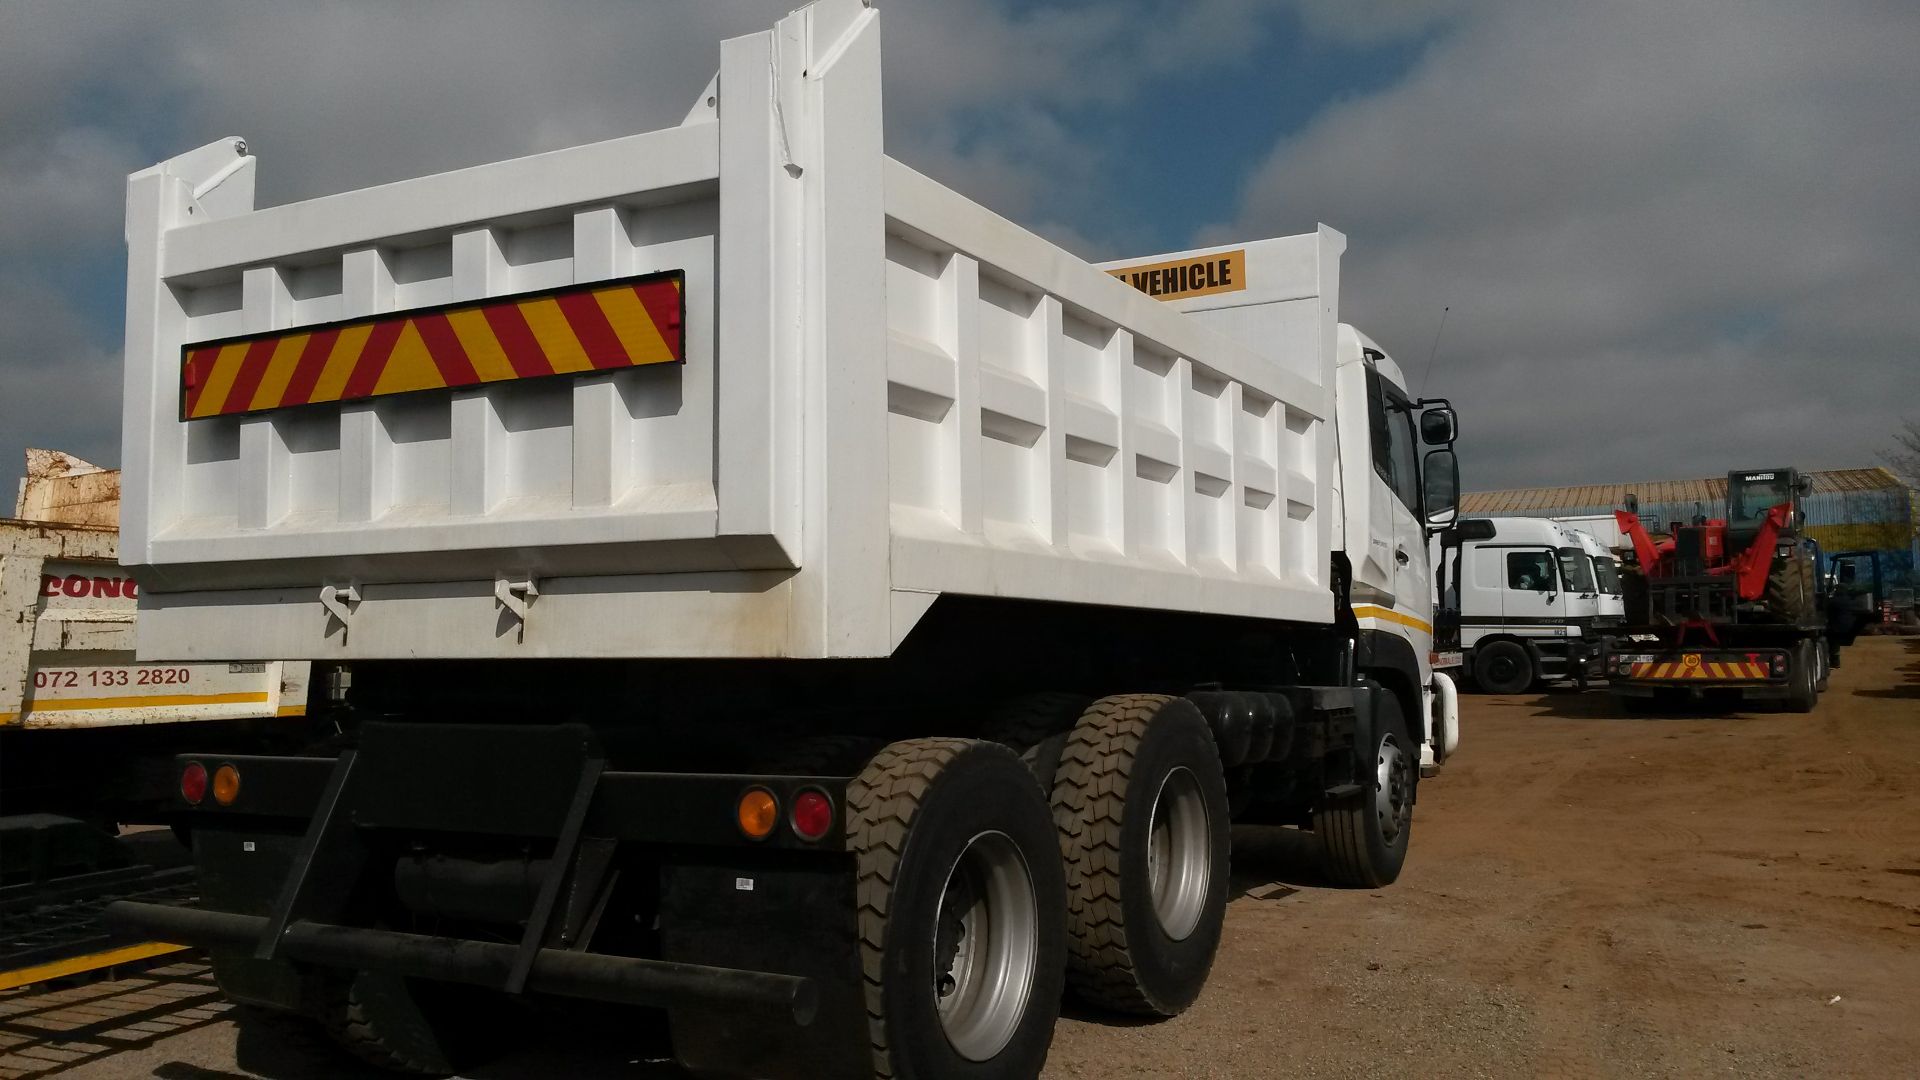 2009 NISSAN UD390 10 CUBE TIPPER - REG NO: YKN717GP - Image 3 of 5